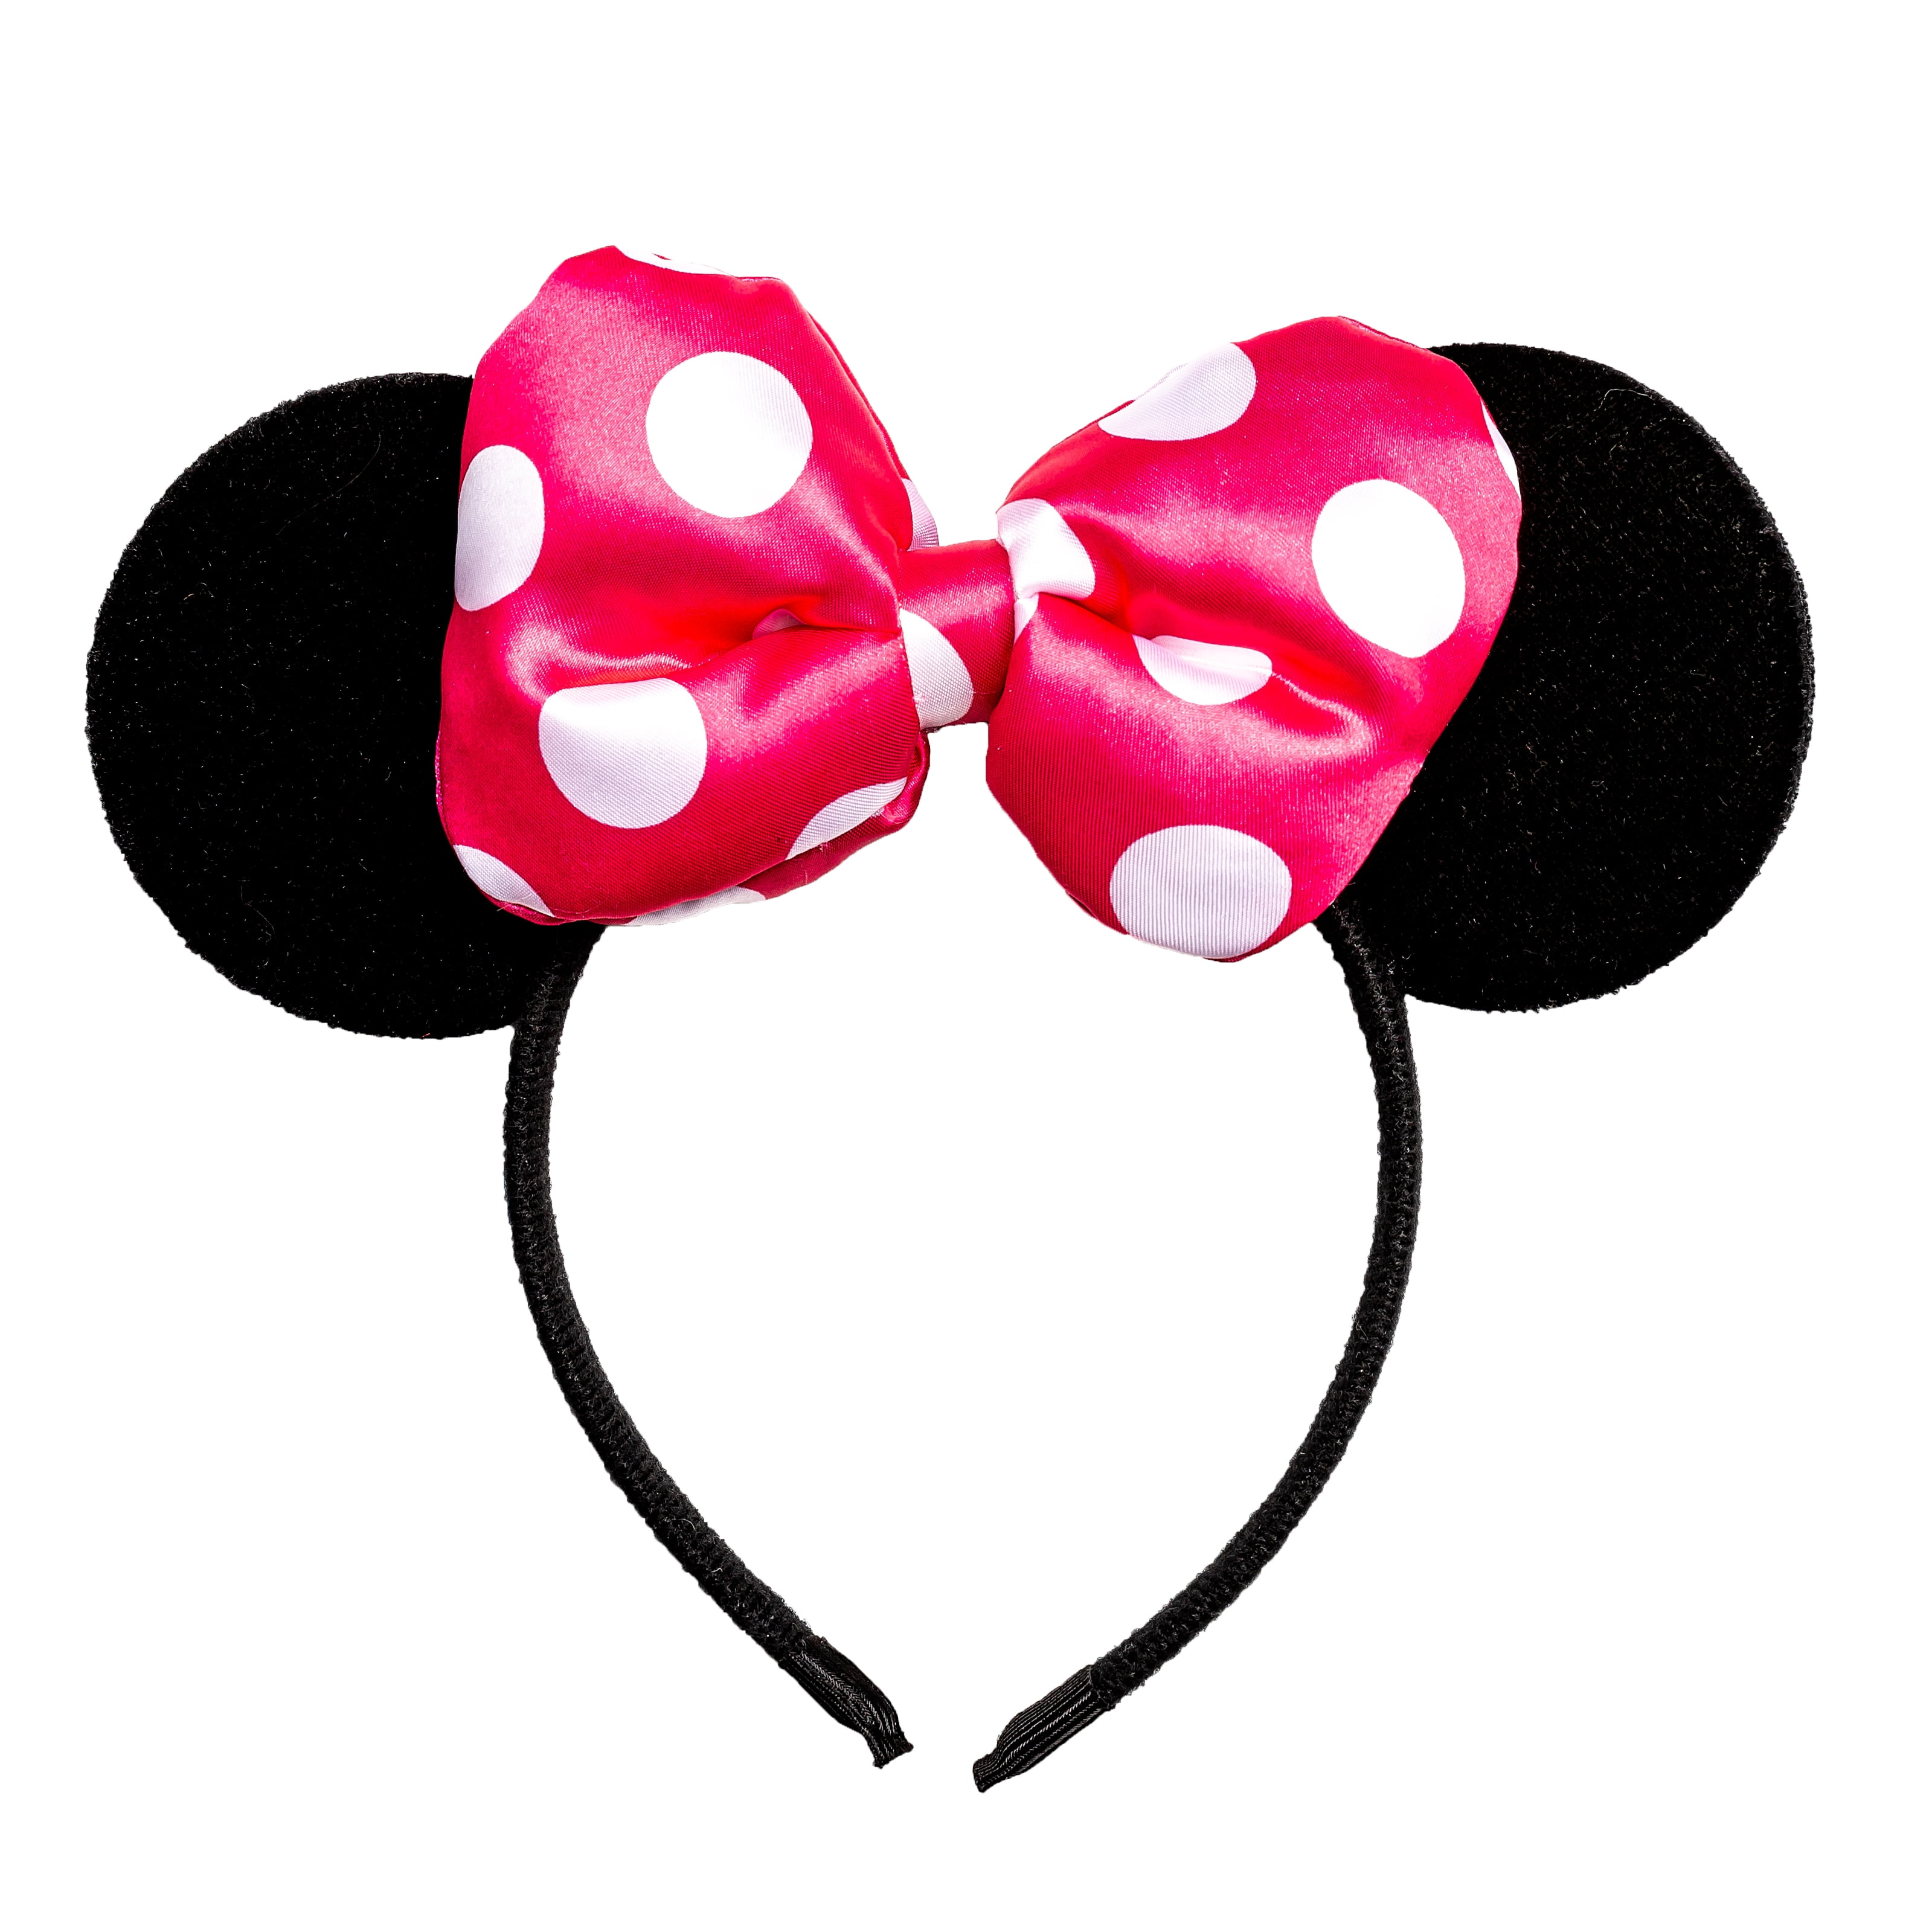 1 PC POLKADOT MICKEY MOUSE RED BOW EARS HEADBAND FITS MOST CHILDREN AND ADULTS